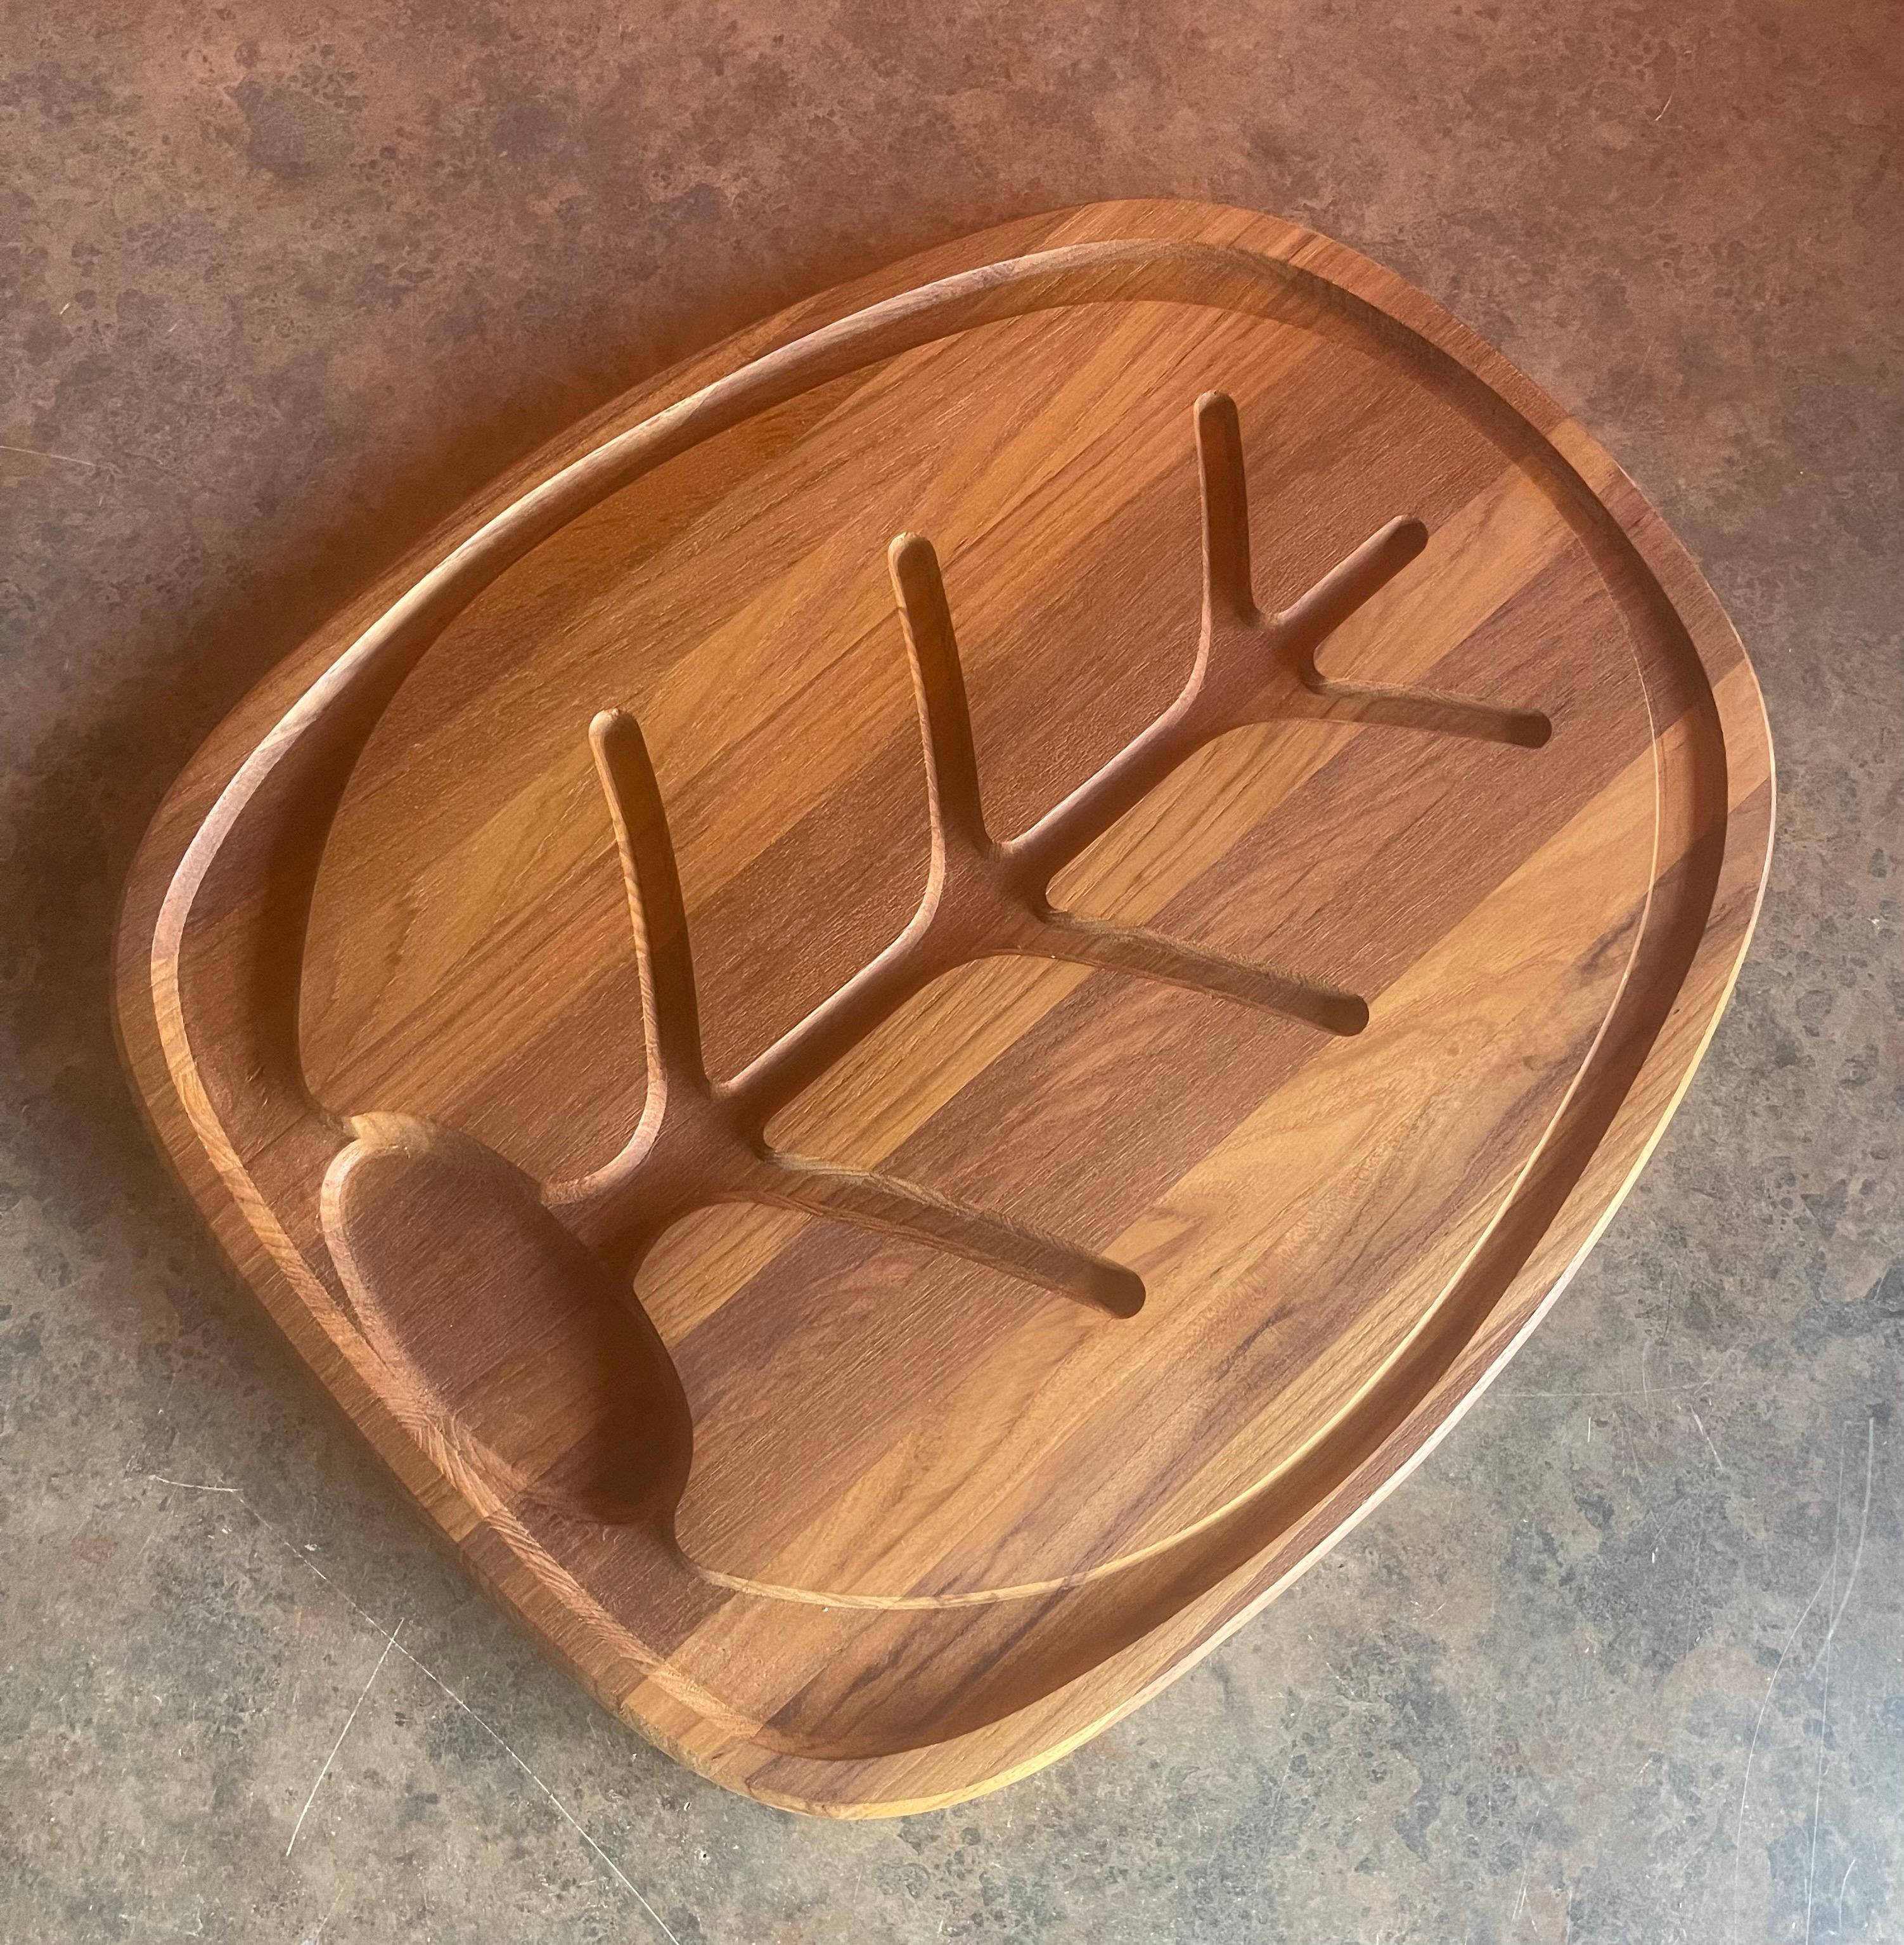 MCM staved teak carving / cutting board by Selandia, circa 1960s. The board brand new / old stock in original box and in excellent condition. The piece is very well made with a nice beveled edge and a built in drain for juices. The board is signed